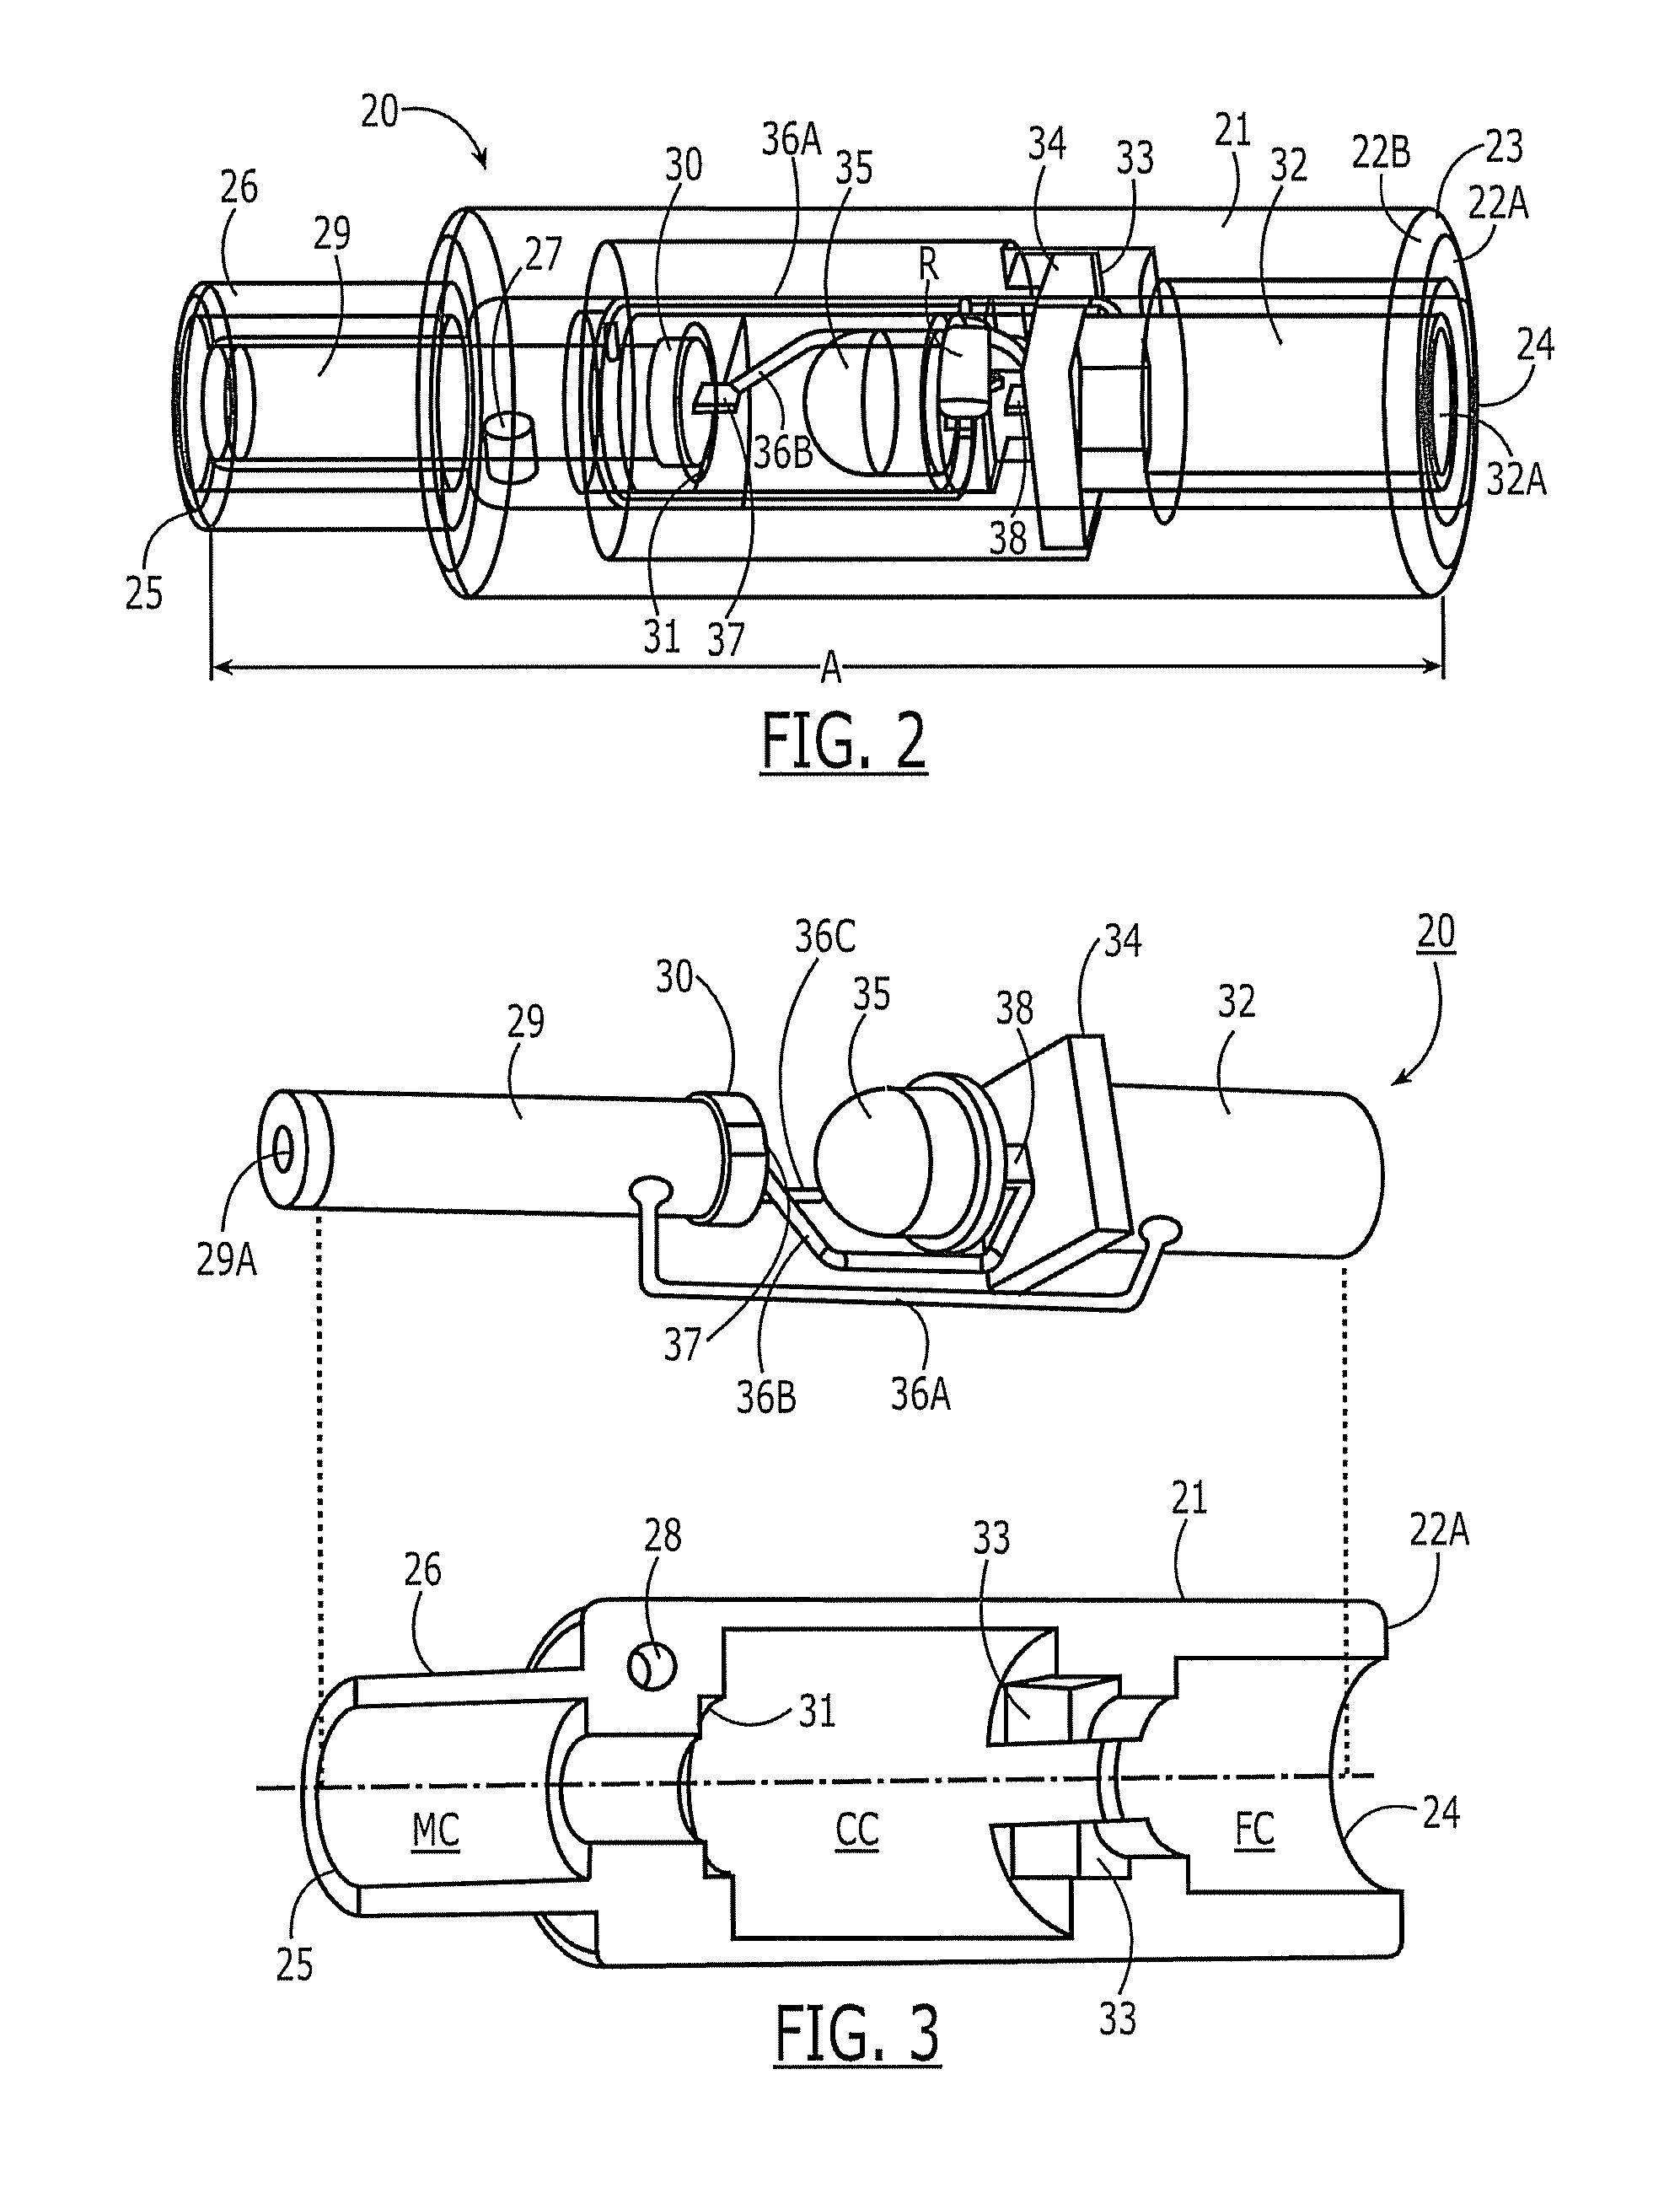 Illuminated toy building system and methods